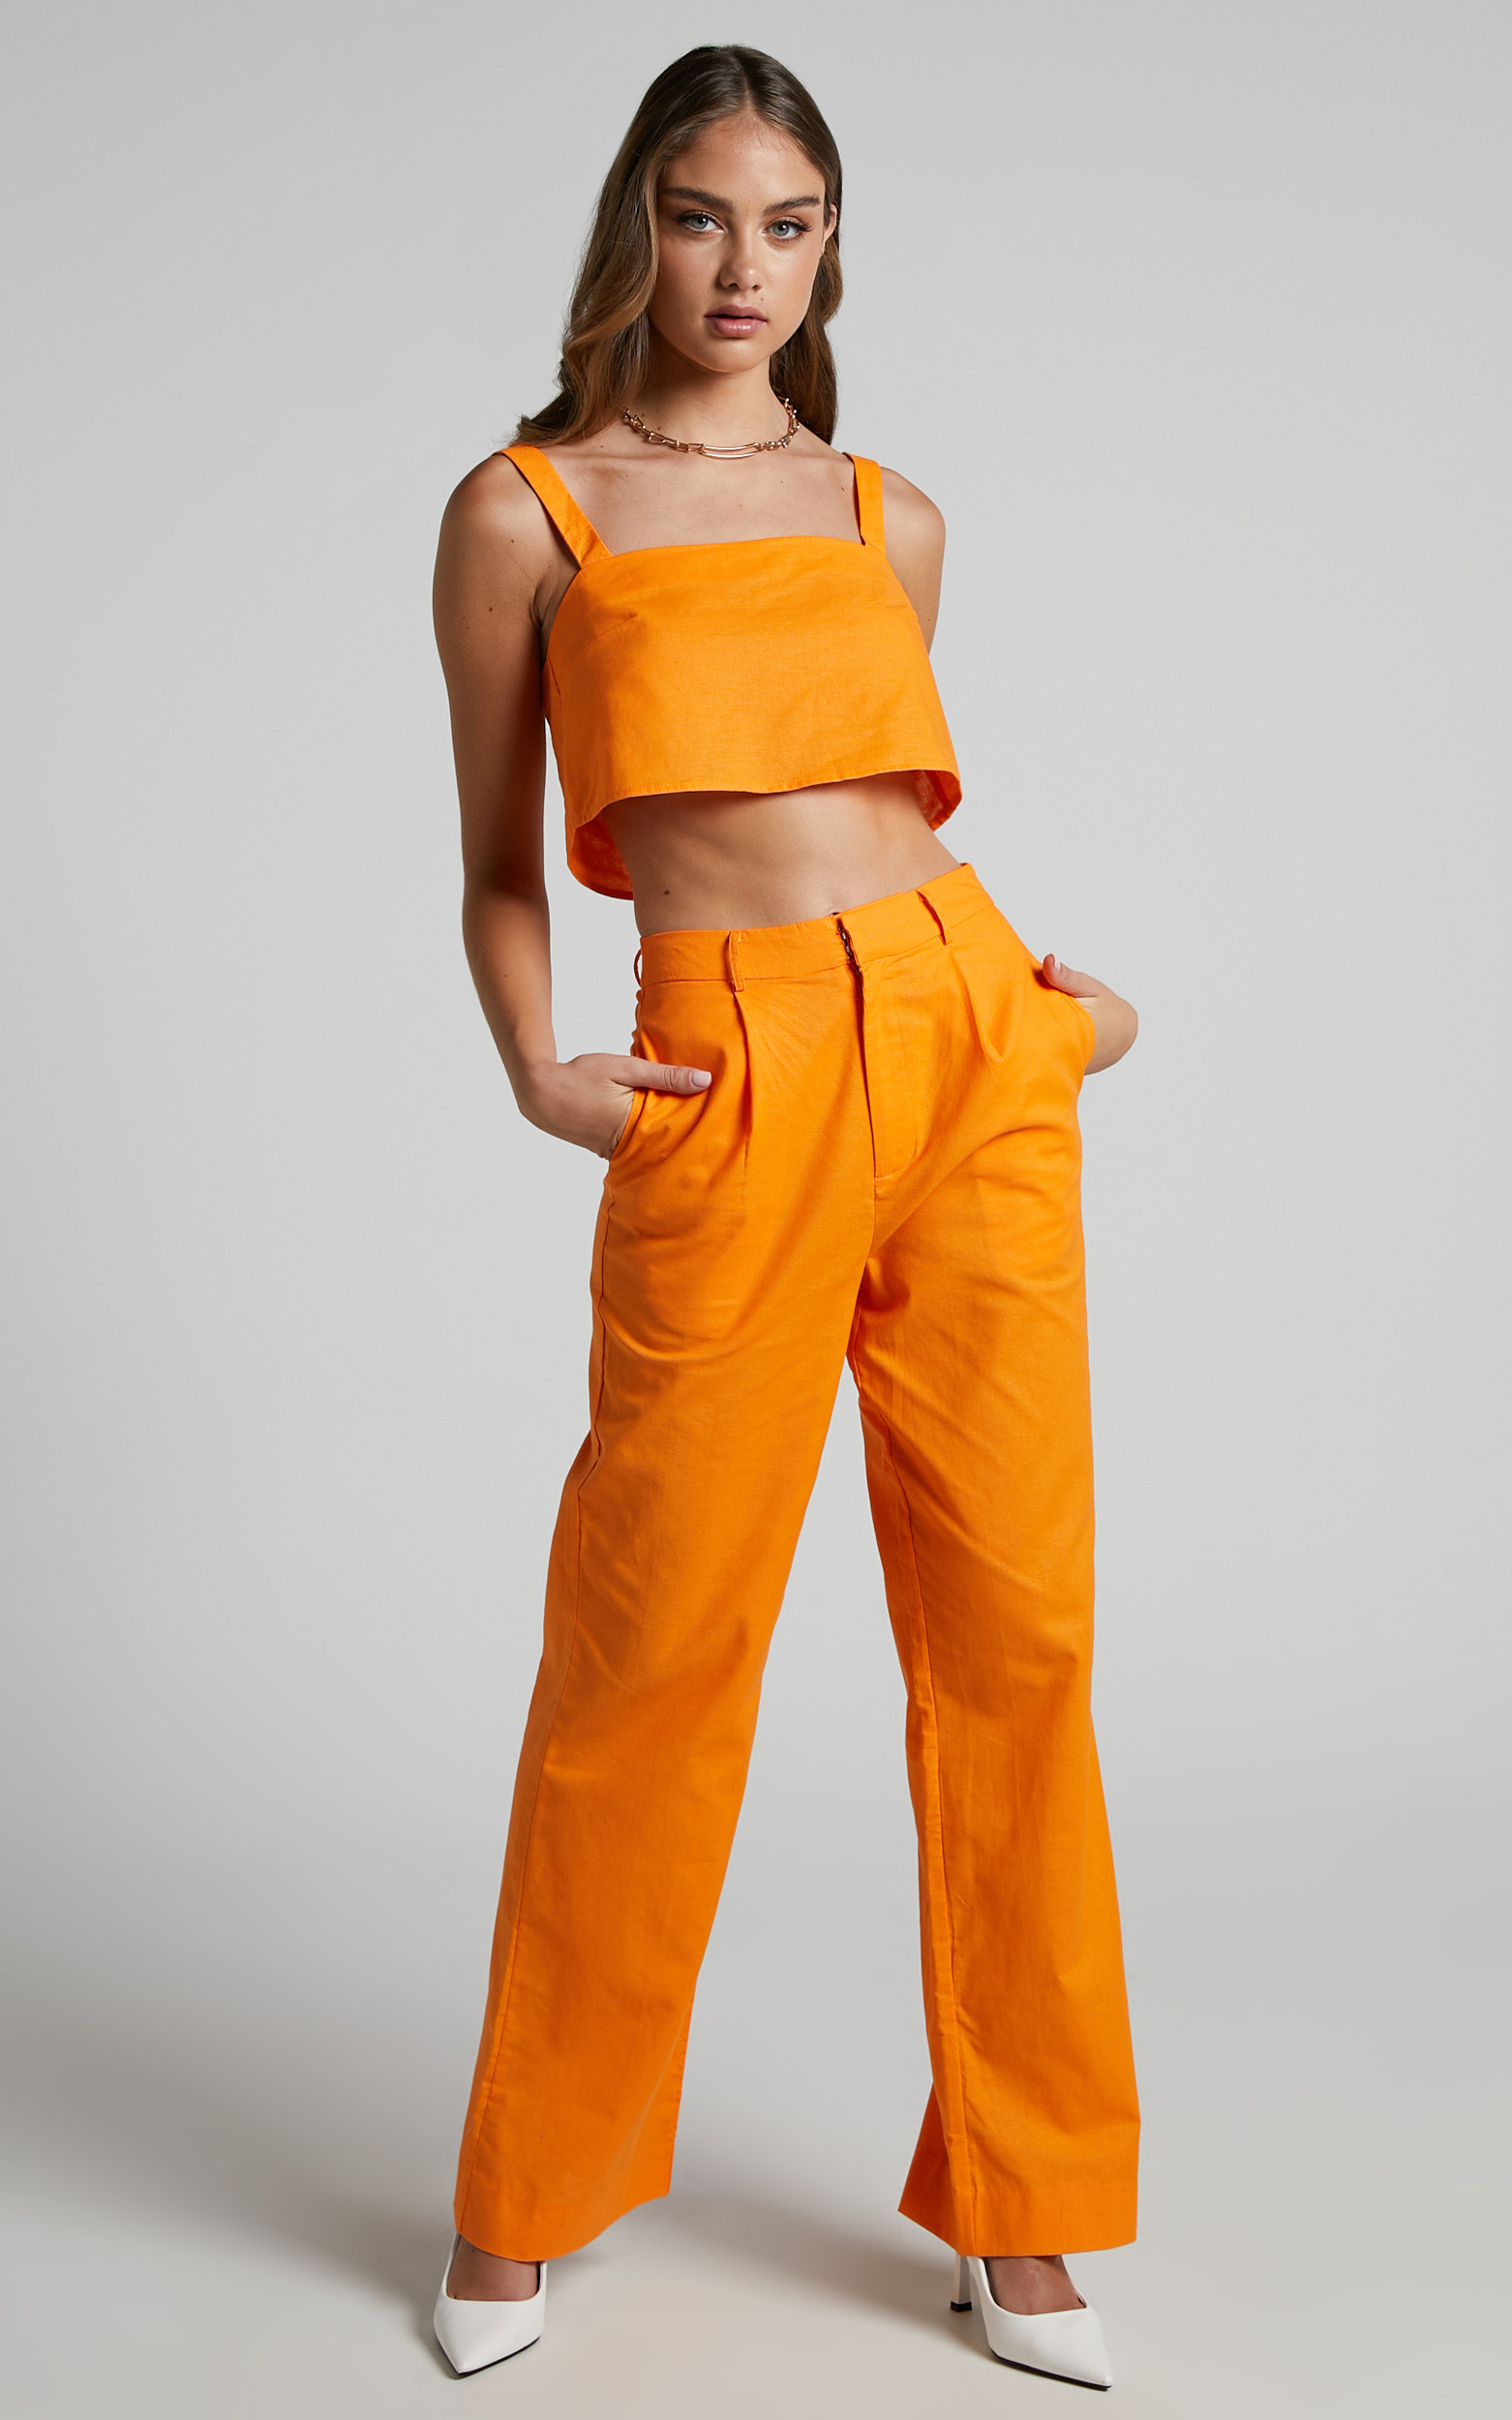 Claudina Two Piece Set - Cropped Cami Top and Relaxed Pant in Bright ...